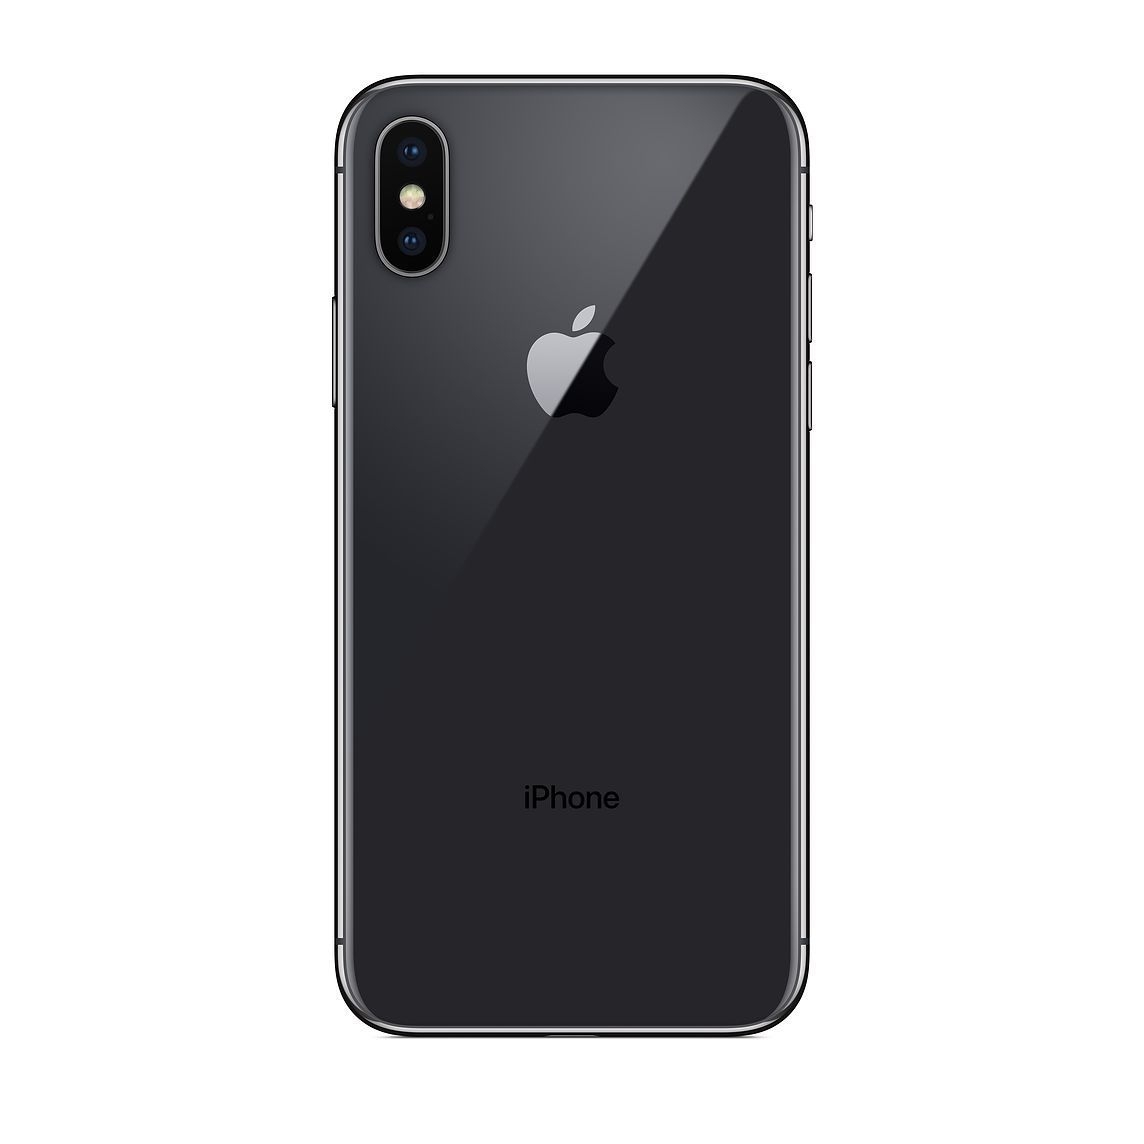 Apple, iPhone X, 64GB, Unlocked to any Network, 12 Months Warranty – 64GB / SpaceGray